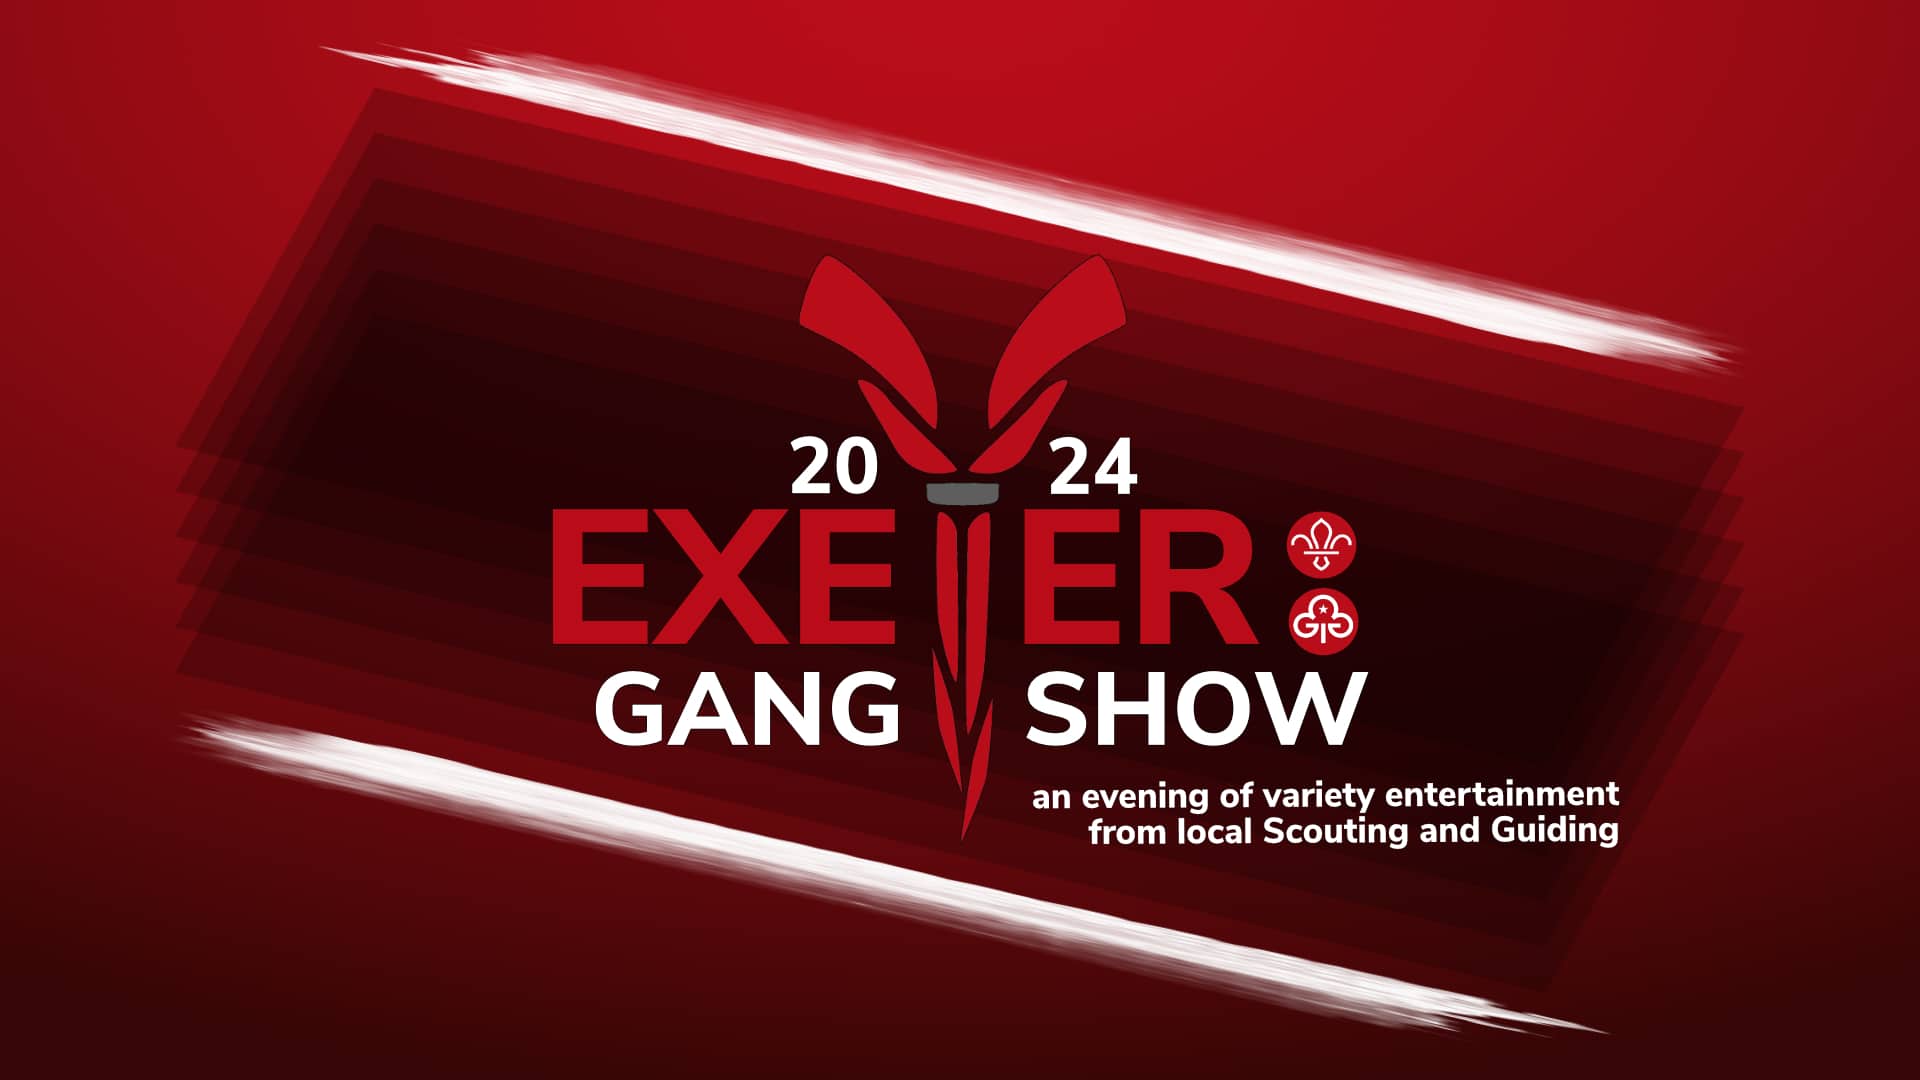 Exeter Gang Show 2024 artwork. Red to black gradient background. (Centre) transparent black rectangle shapes laid over each other. The Exeter Gang Show 2024 logo: A red illustration of a torch in between text that reads: ‘2024 Exeter Gang Show.’ On the right-hand side of the word ‘Exeter’, logos for the Guides and Scouts. Below the word ‘Show’, text reads: ‘an evening of variety and entertainment form local Scouting and Guiding.’